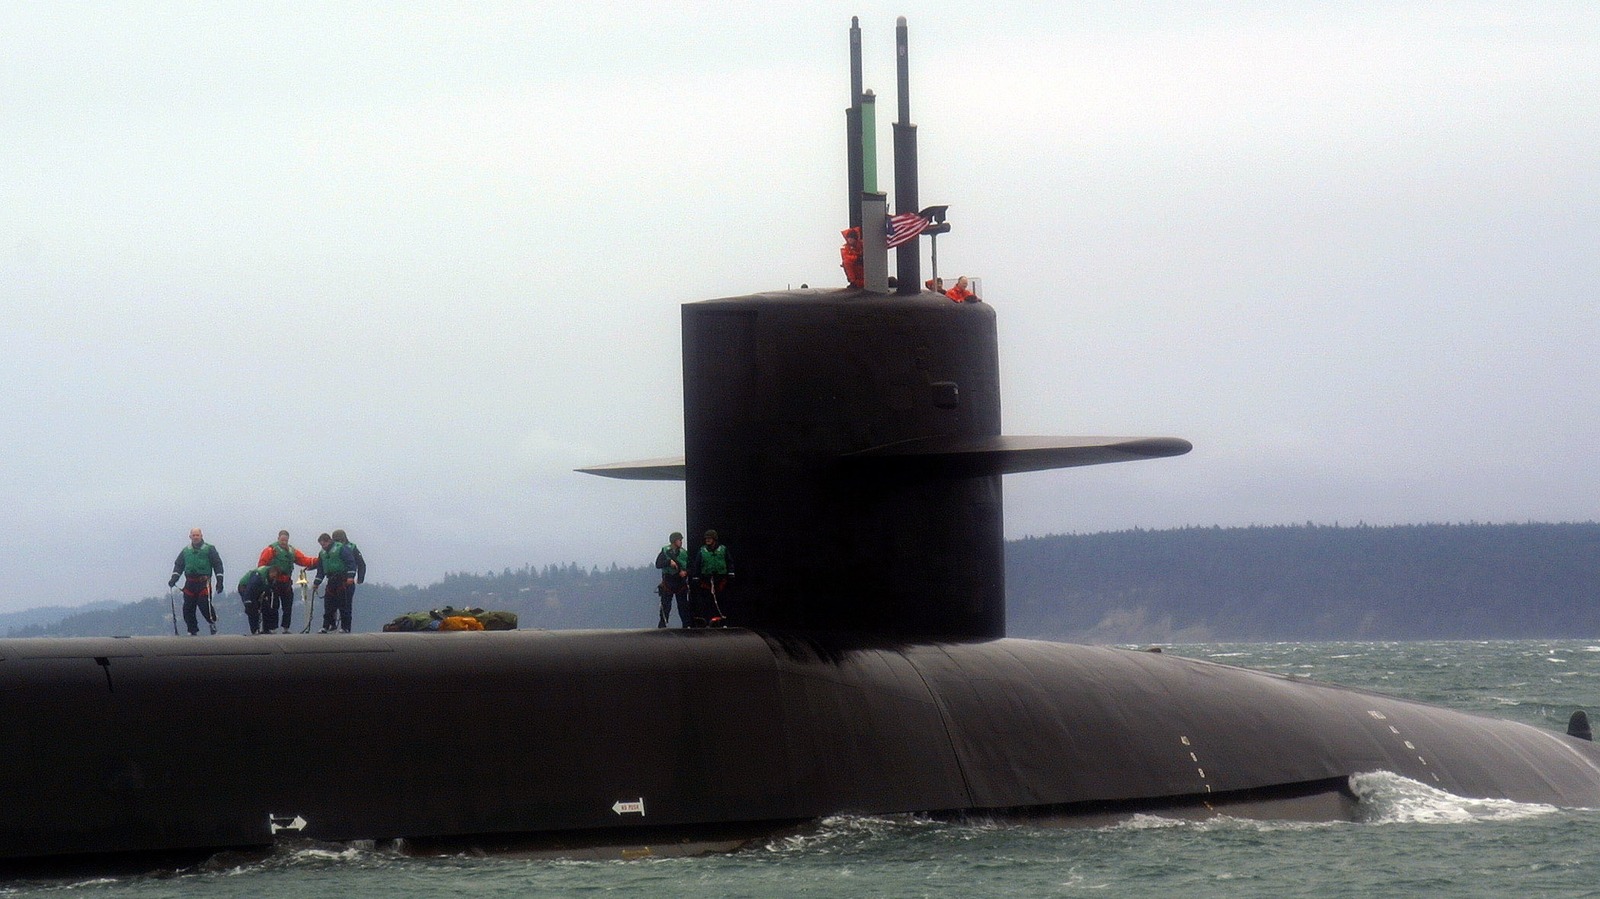 Why The Ohio Class Submarine Is The Best Unused Weapon In The U.S. Arsenal